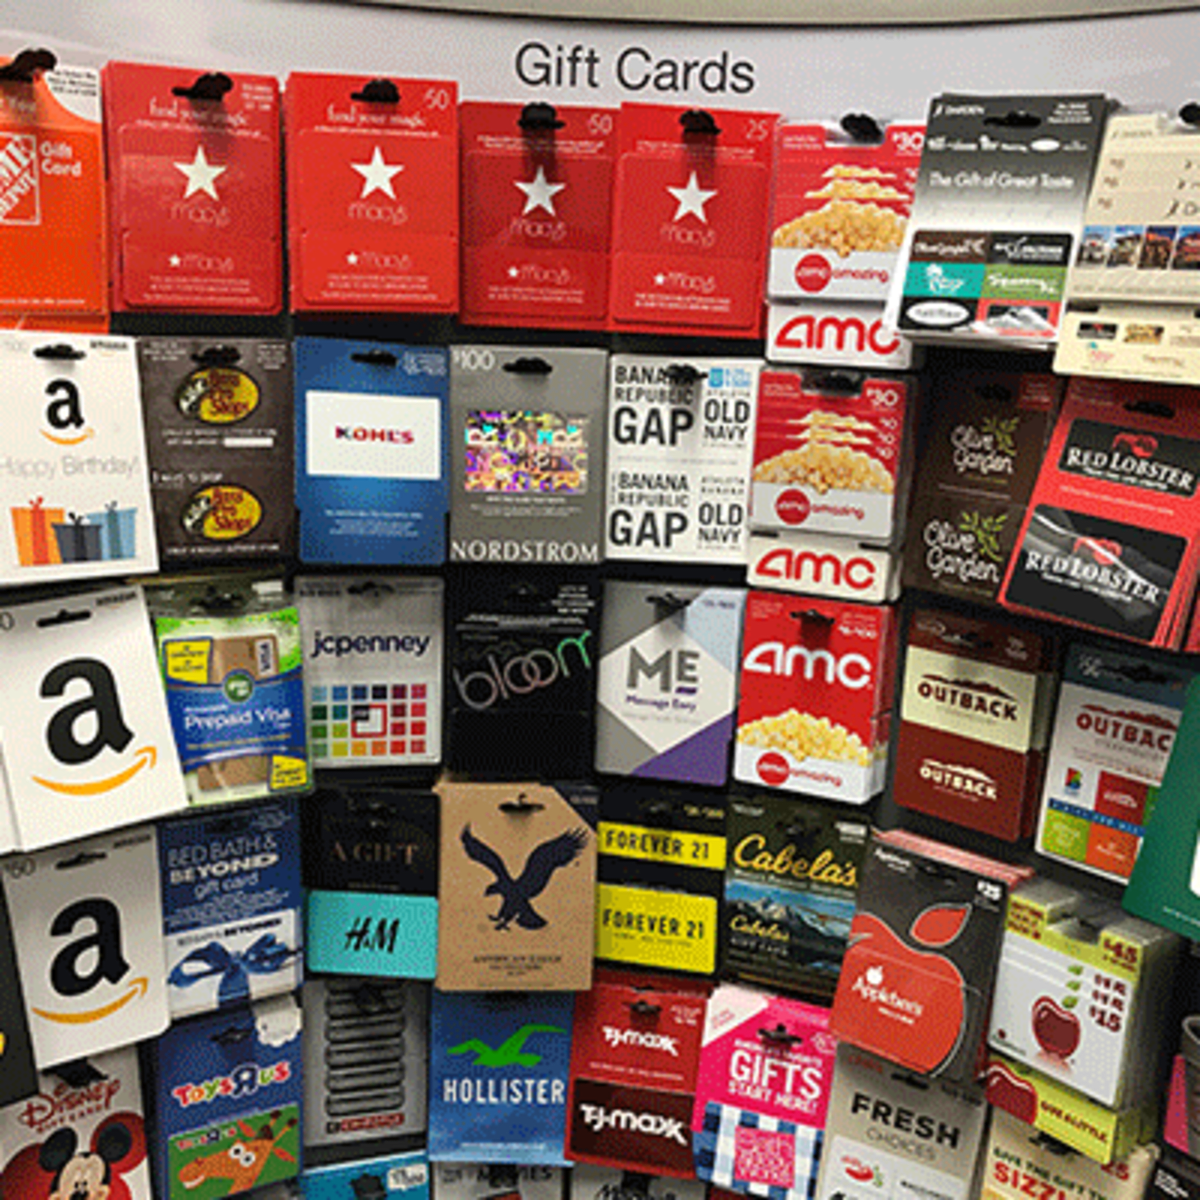 10 Best Gift Cards for your Dollar - TheStreet